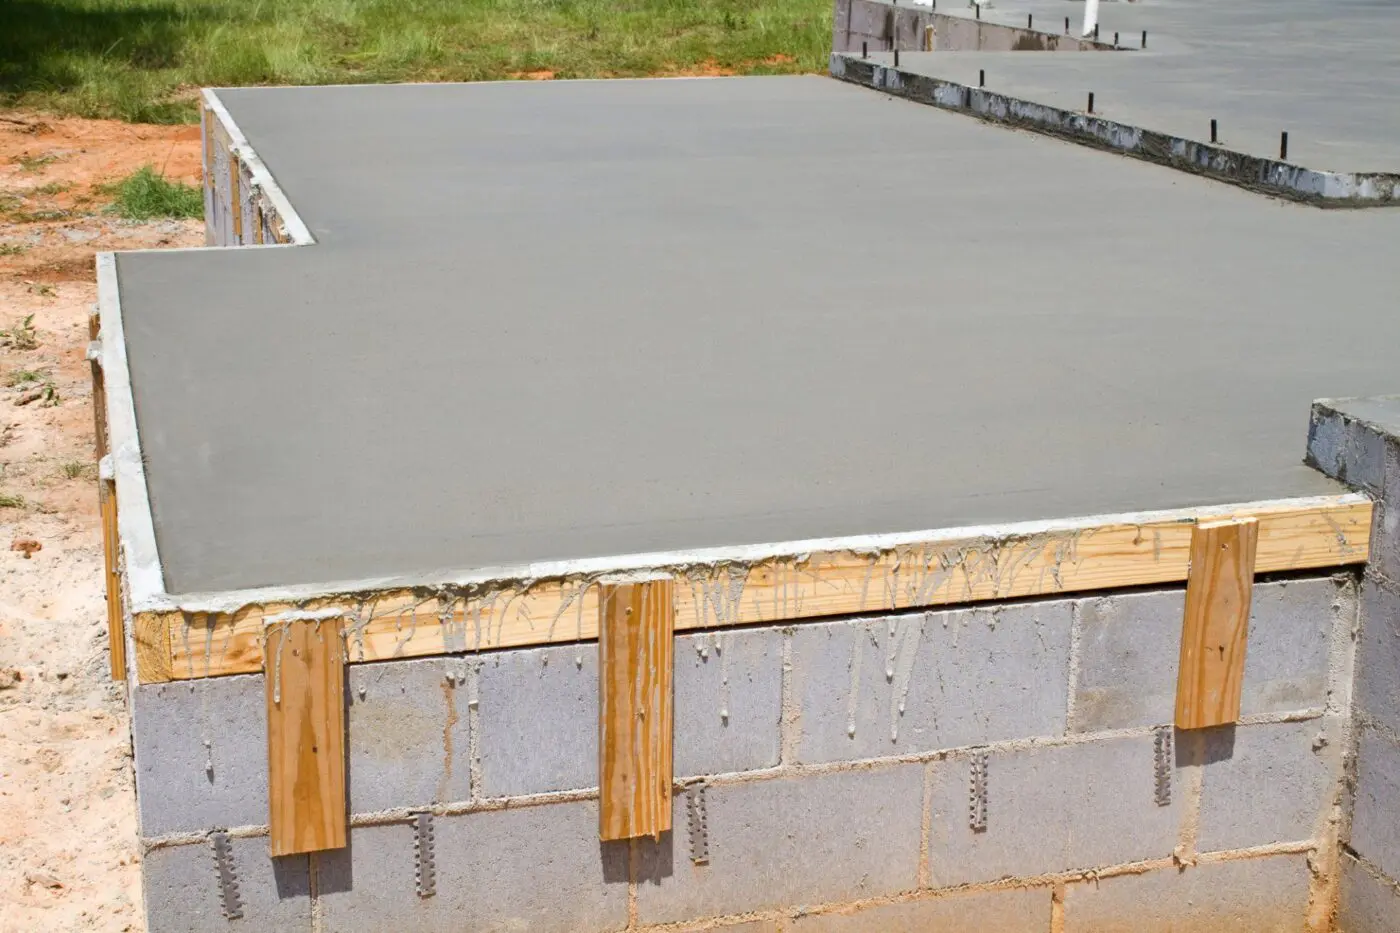 A close-up view of a construction site in Broward County shows a recently poured and smooth concrete foundation. The concrete, ideal for driveways, is laid over a base of cinder blocks, reinforced with wooden planks on the sides. The ground around the site is a mix of dirt and grass.